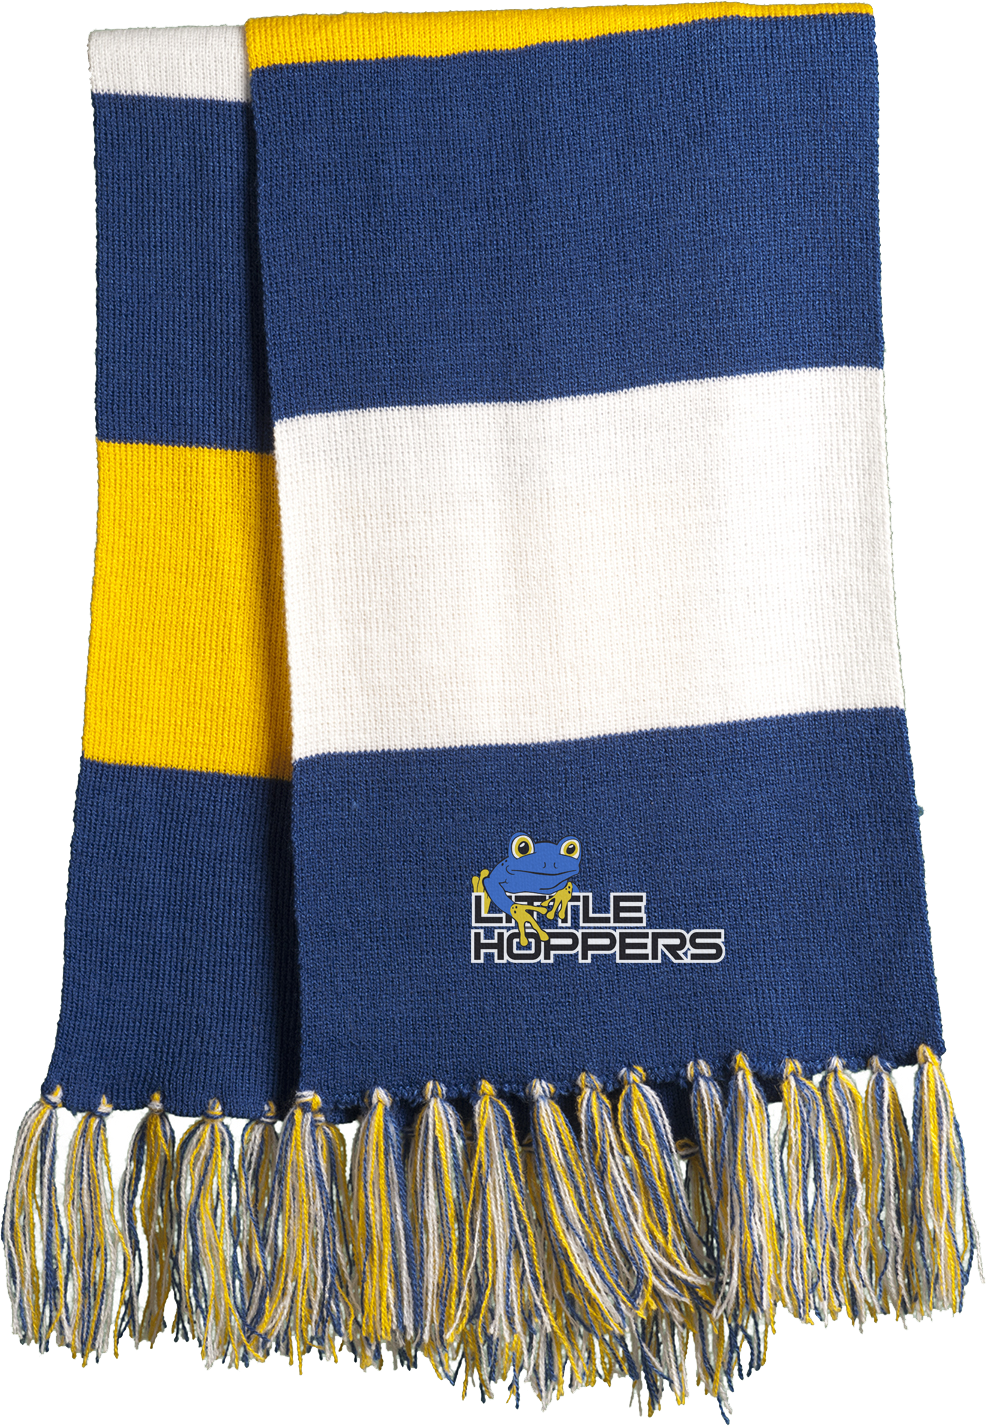 Little Hoppers Royal/Gold/White Scarf